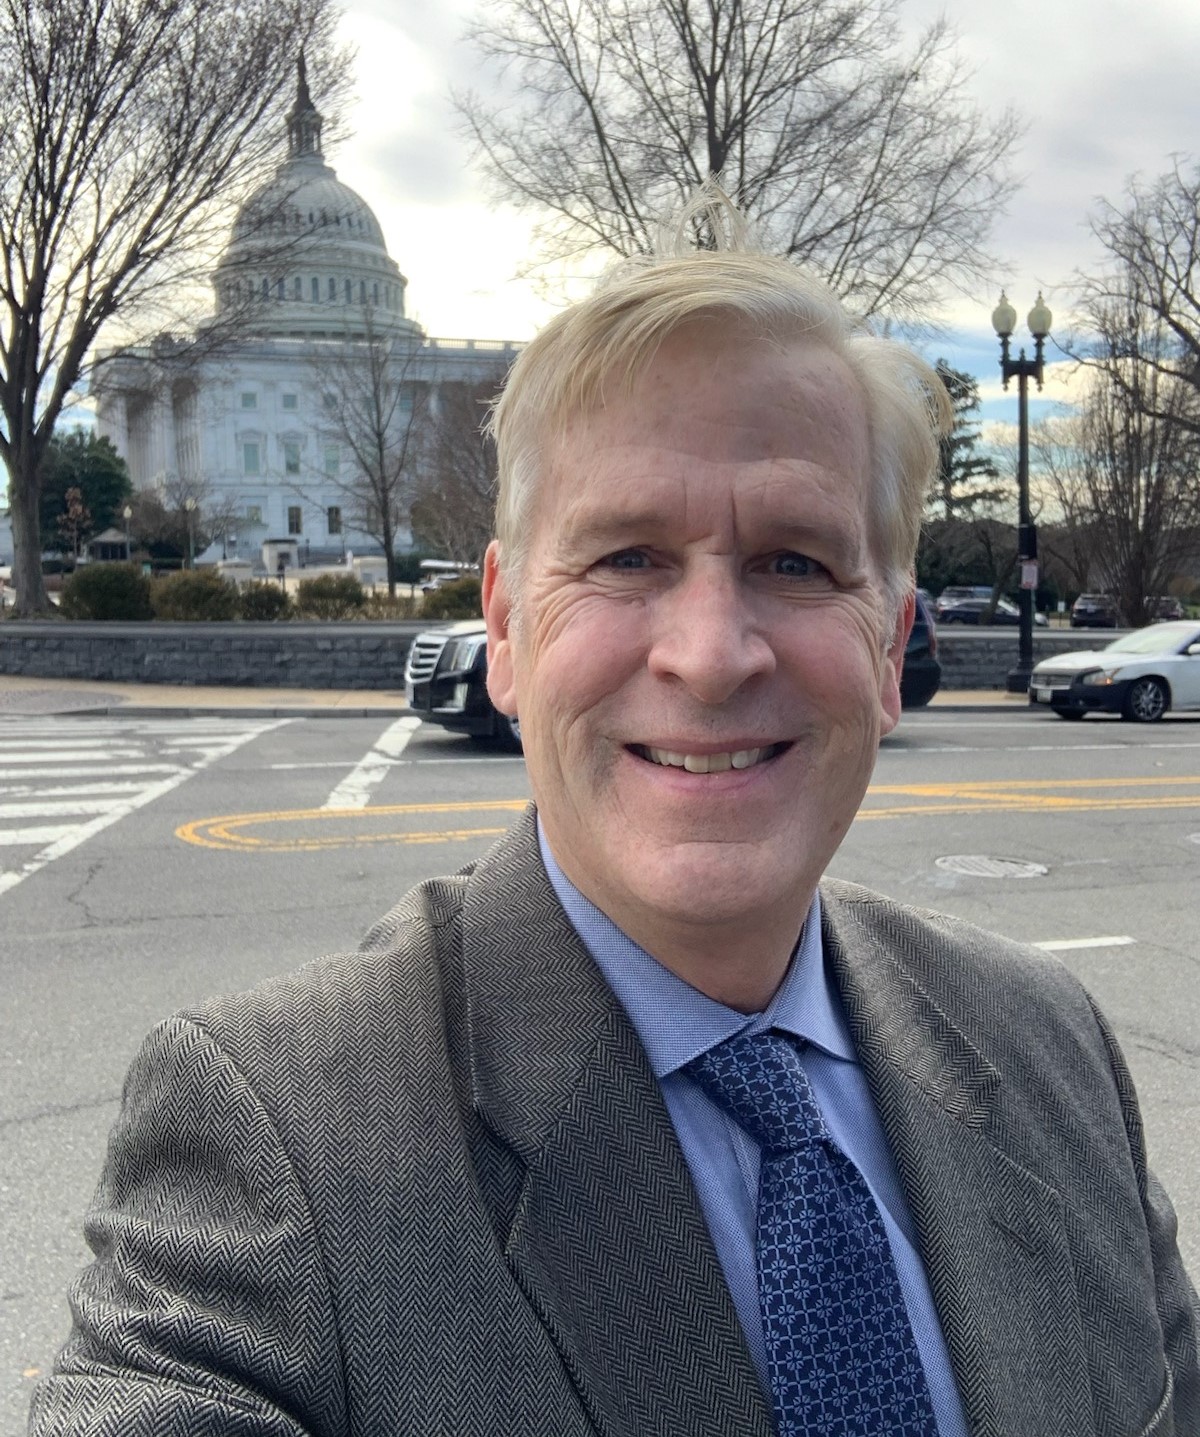 A portrait of Michael Brogioli with the U.S. Capitol building and some leafless winter trees in the background.